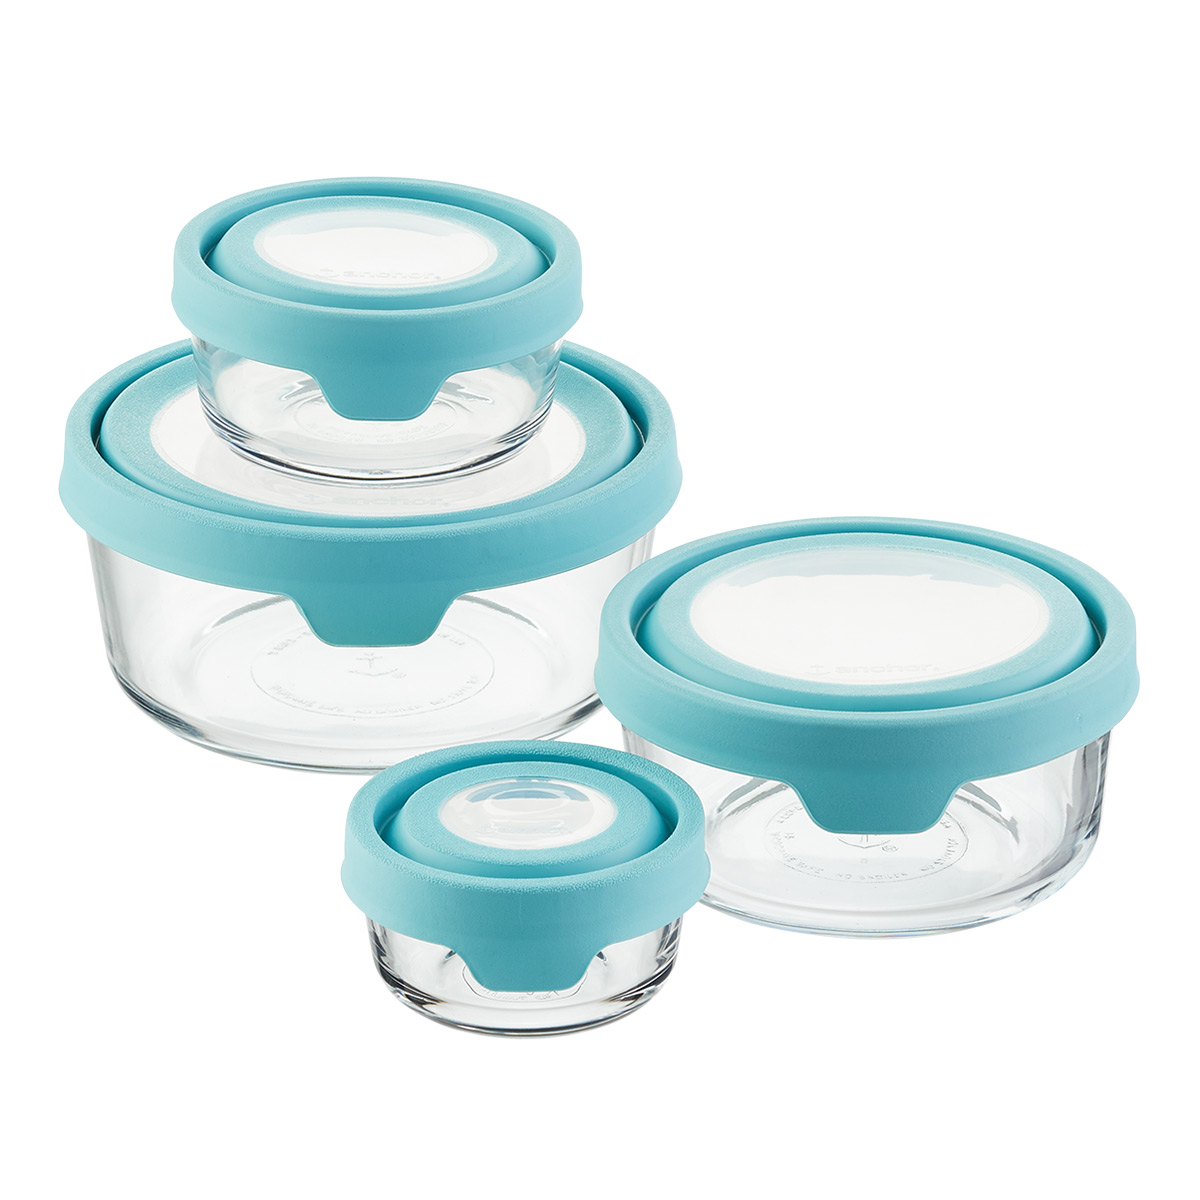 https://www.containerstore.com/catalogimages/351271/10076228g-anchor-trueseal-container-.jpg